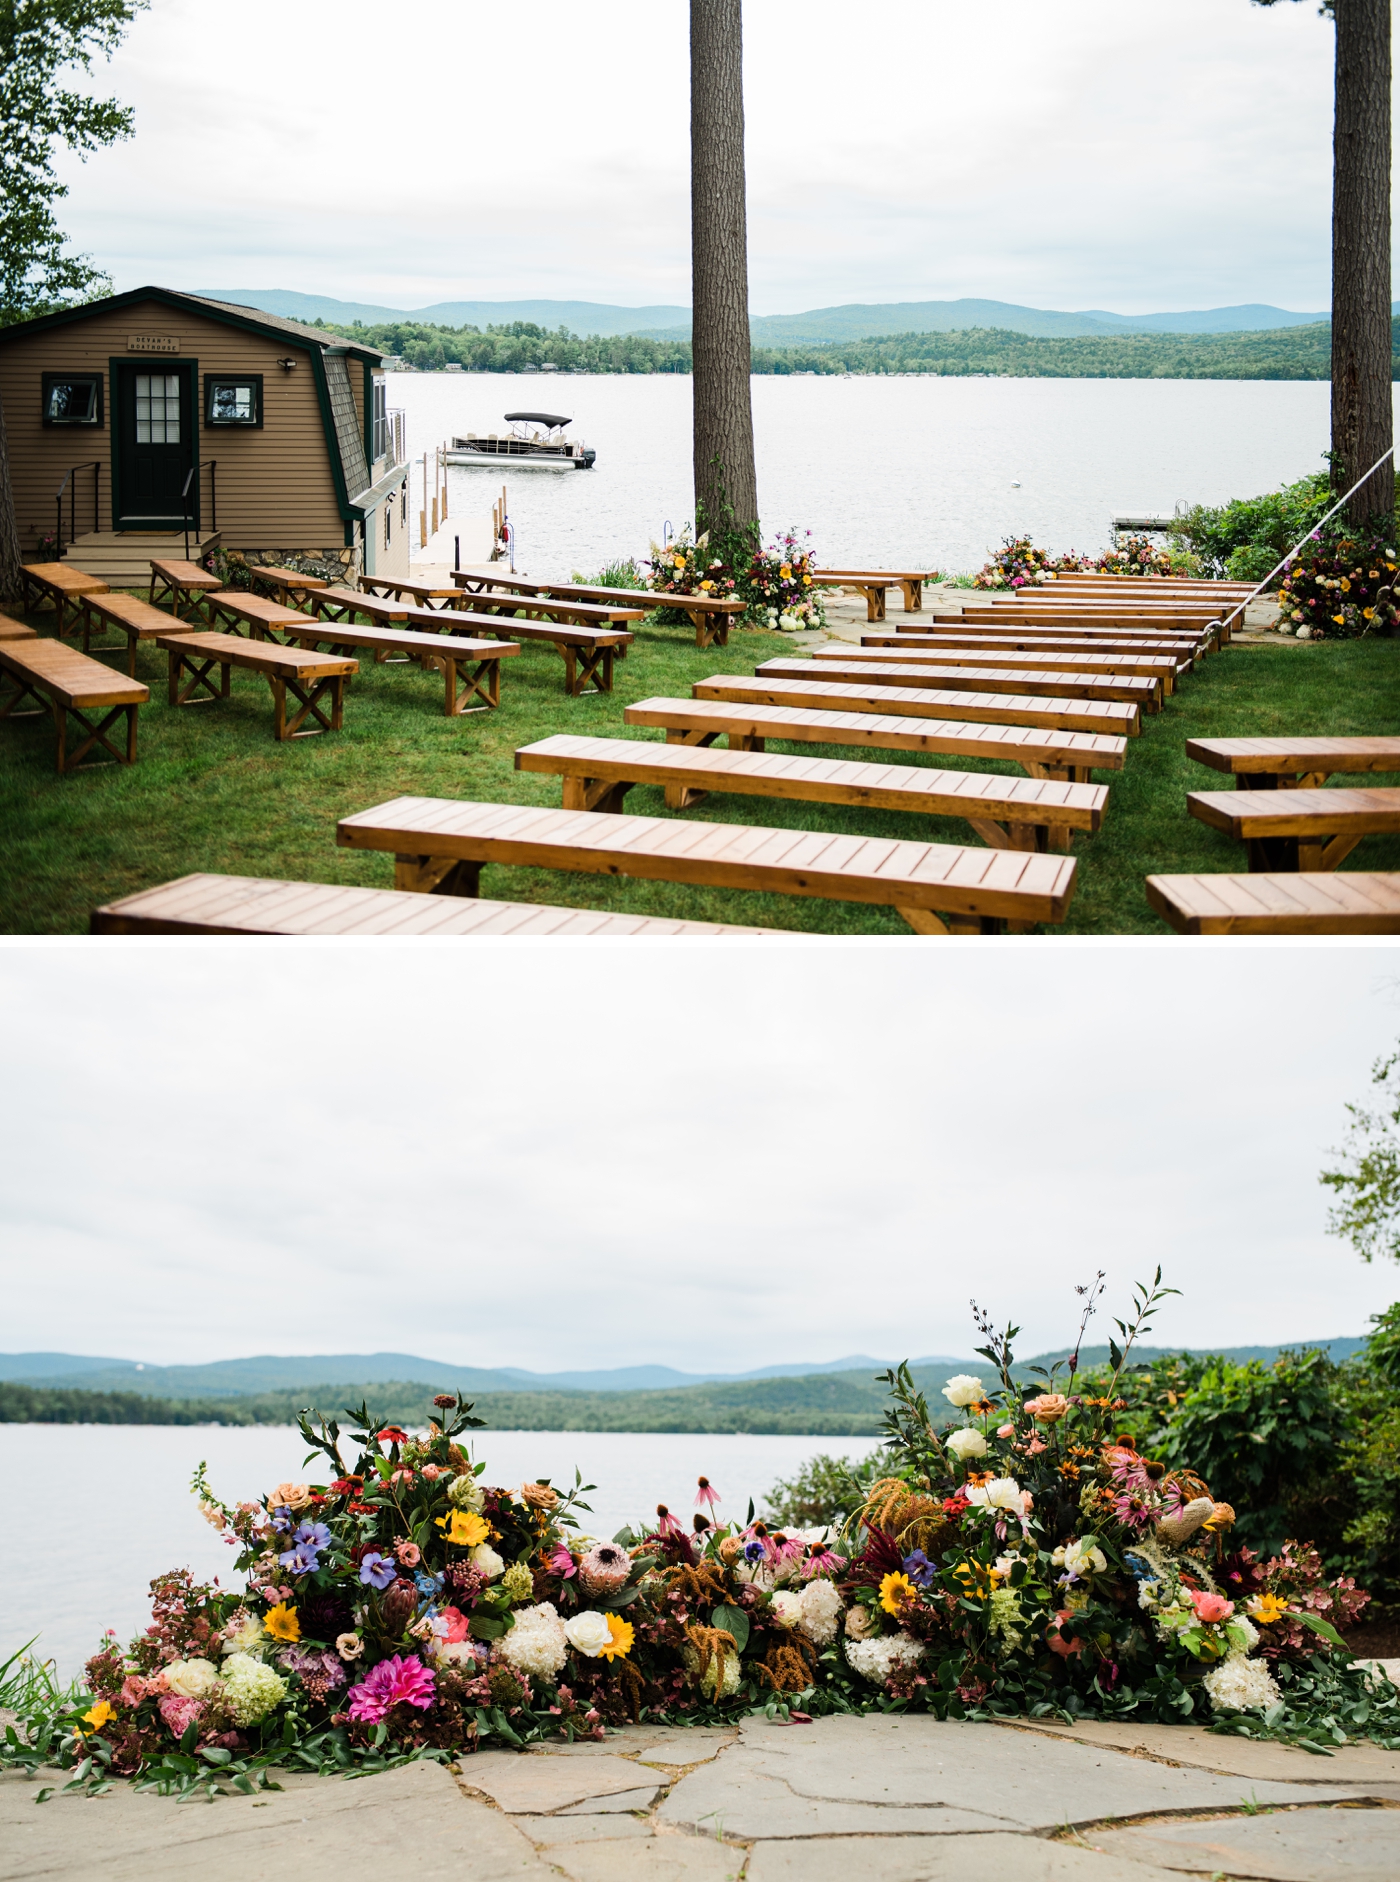 Intimate backyard wedding at a private home on Newfound Lake